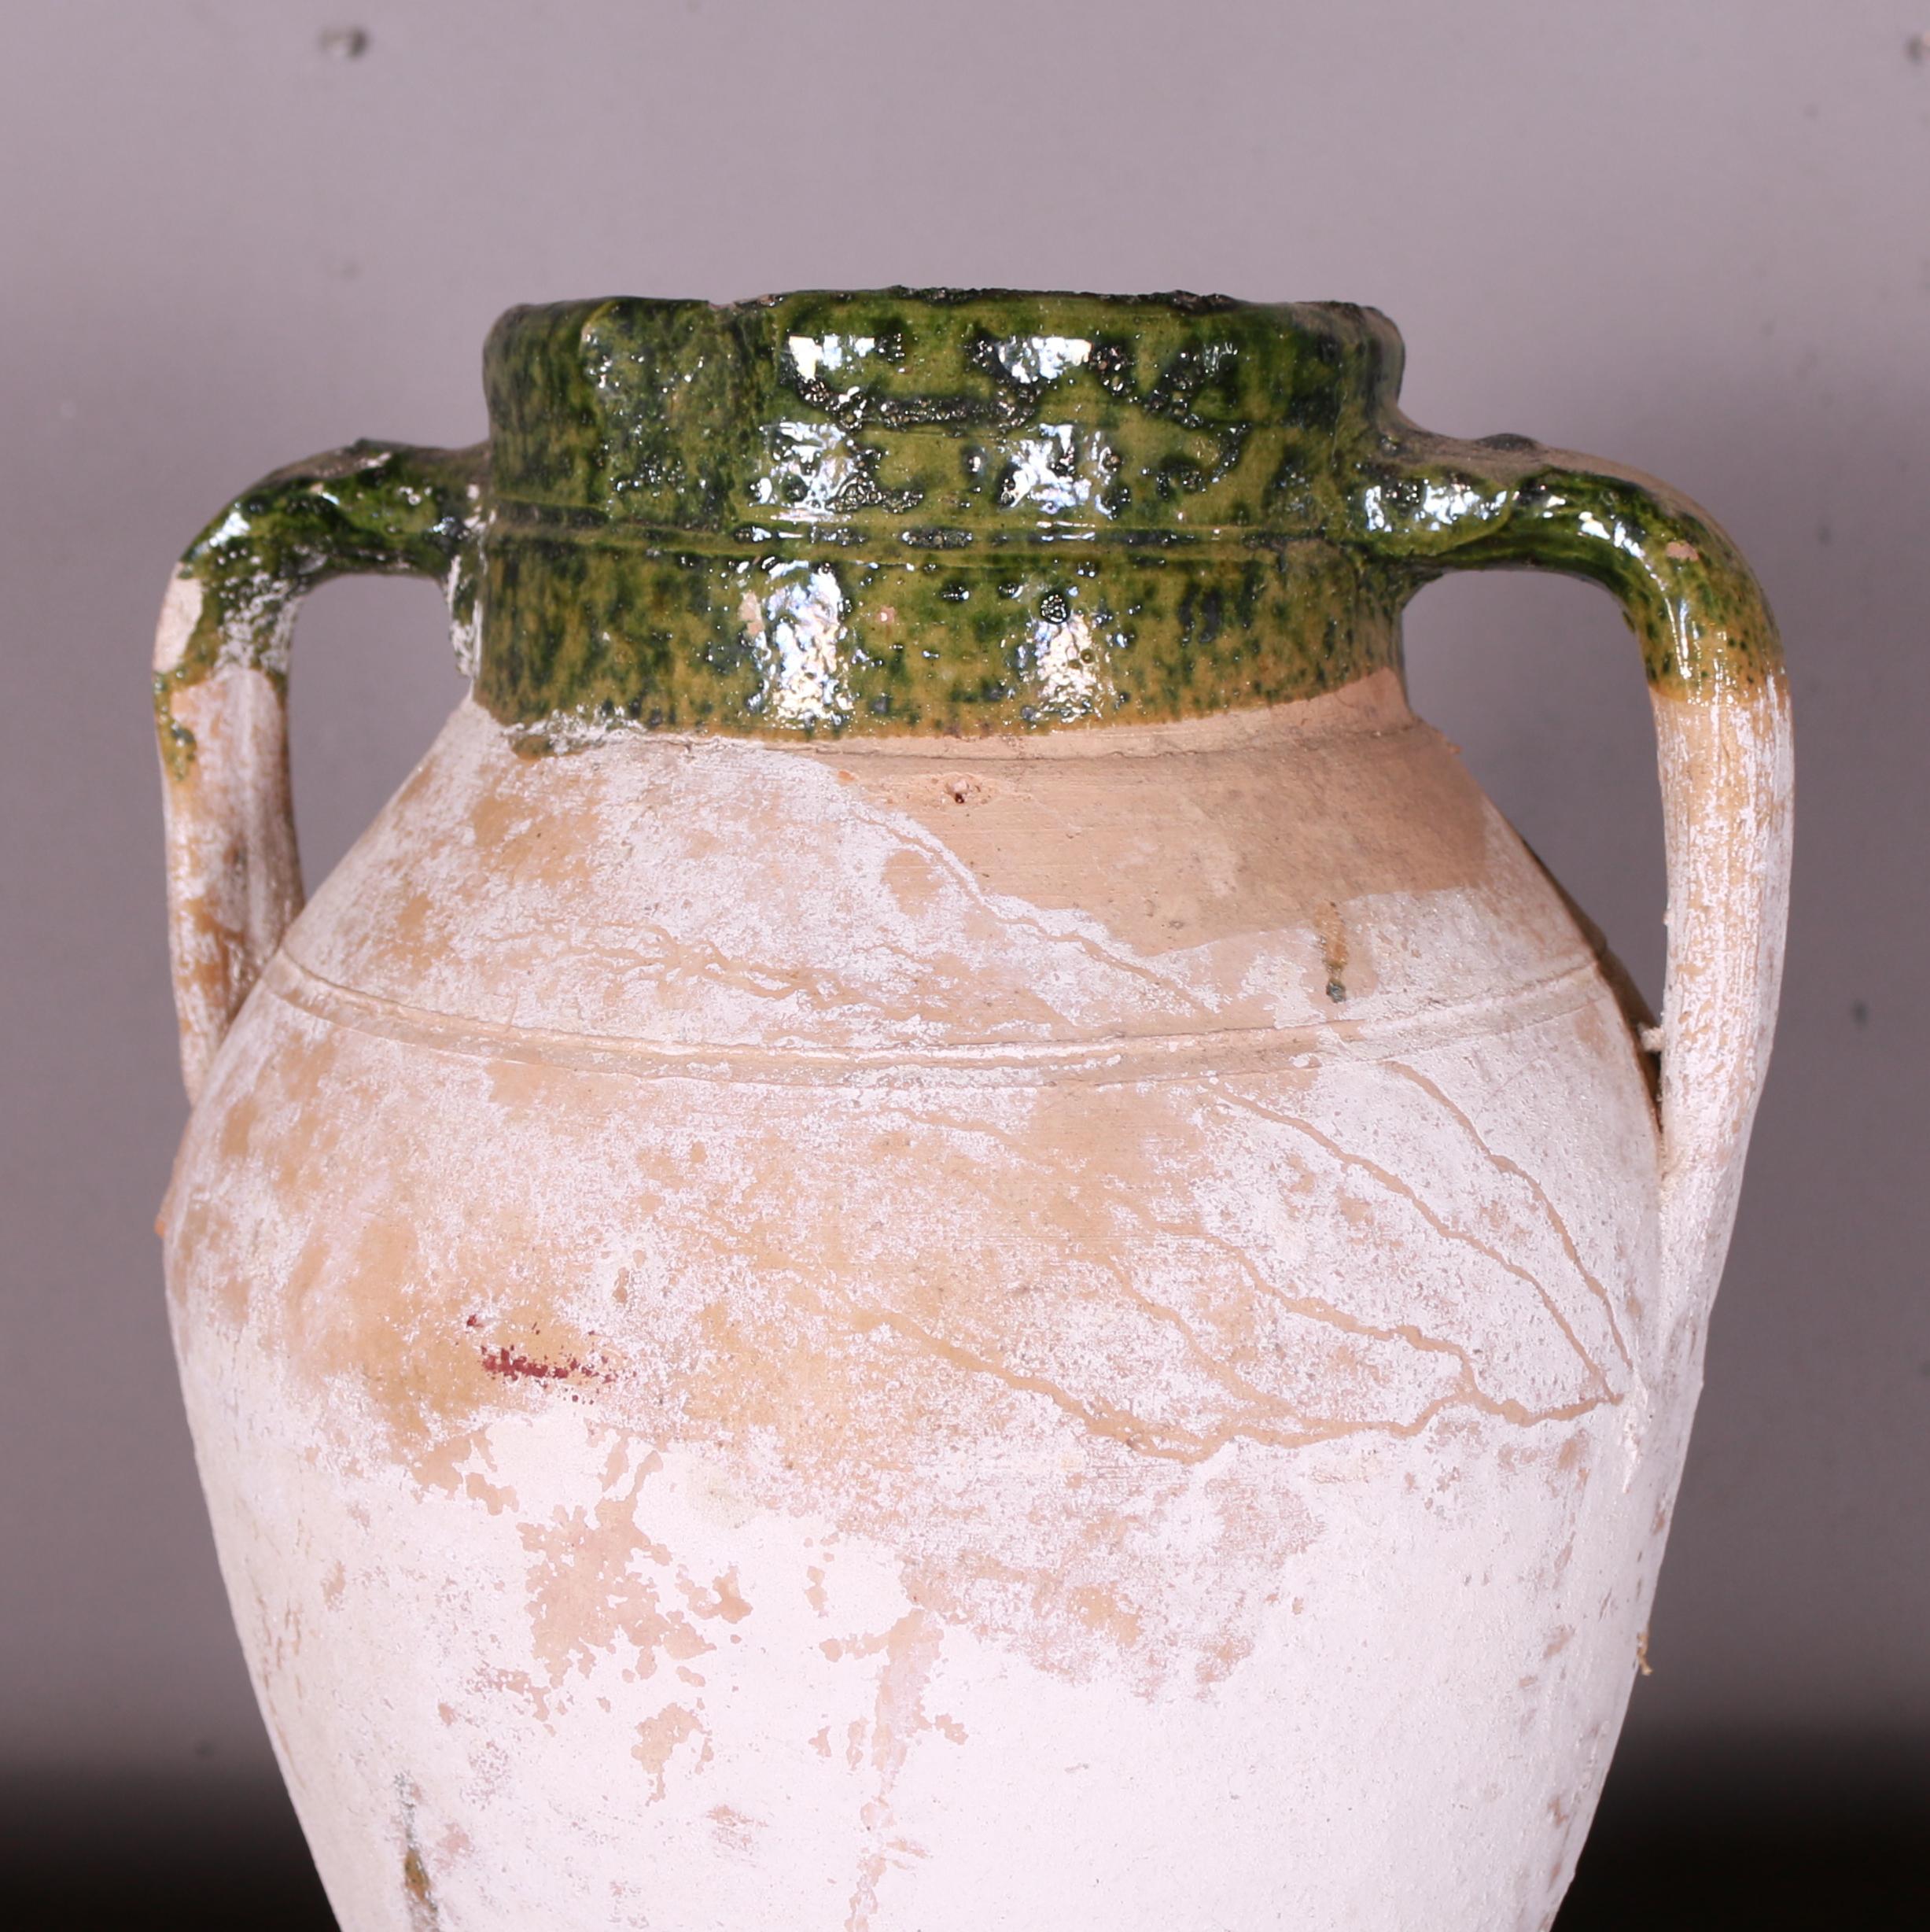 Turkish antique water pot with green glaze and original white paint. 1900

Dimensions
16 inches (41 cms) high
11 inches (28 cms) diameter.

     